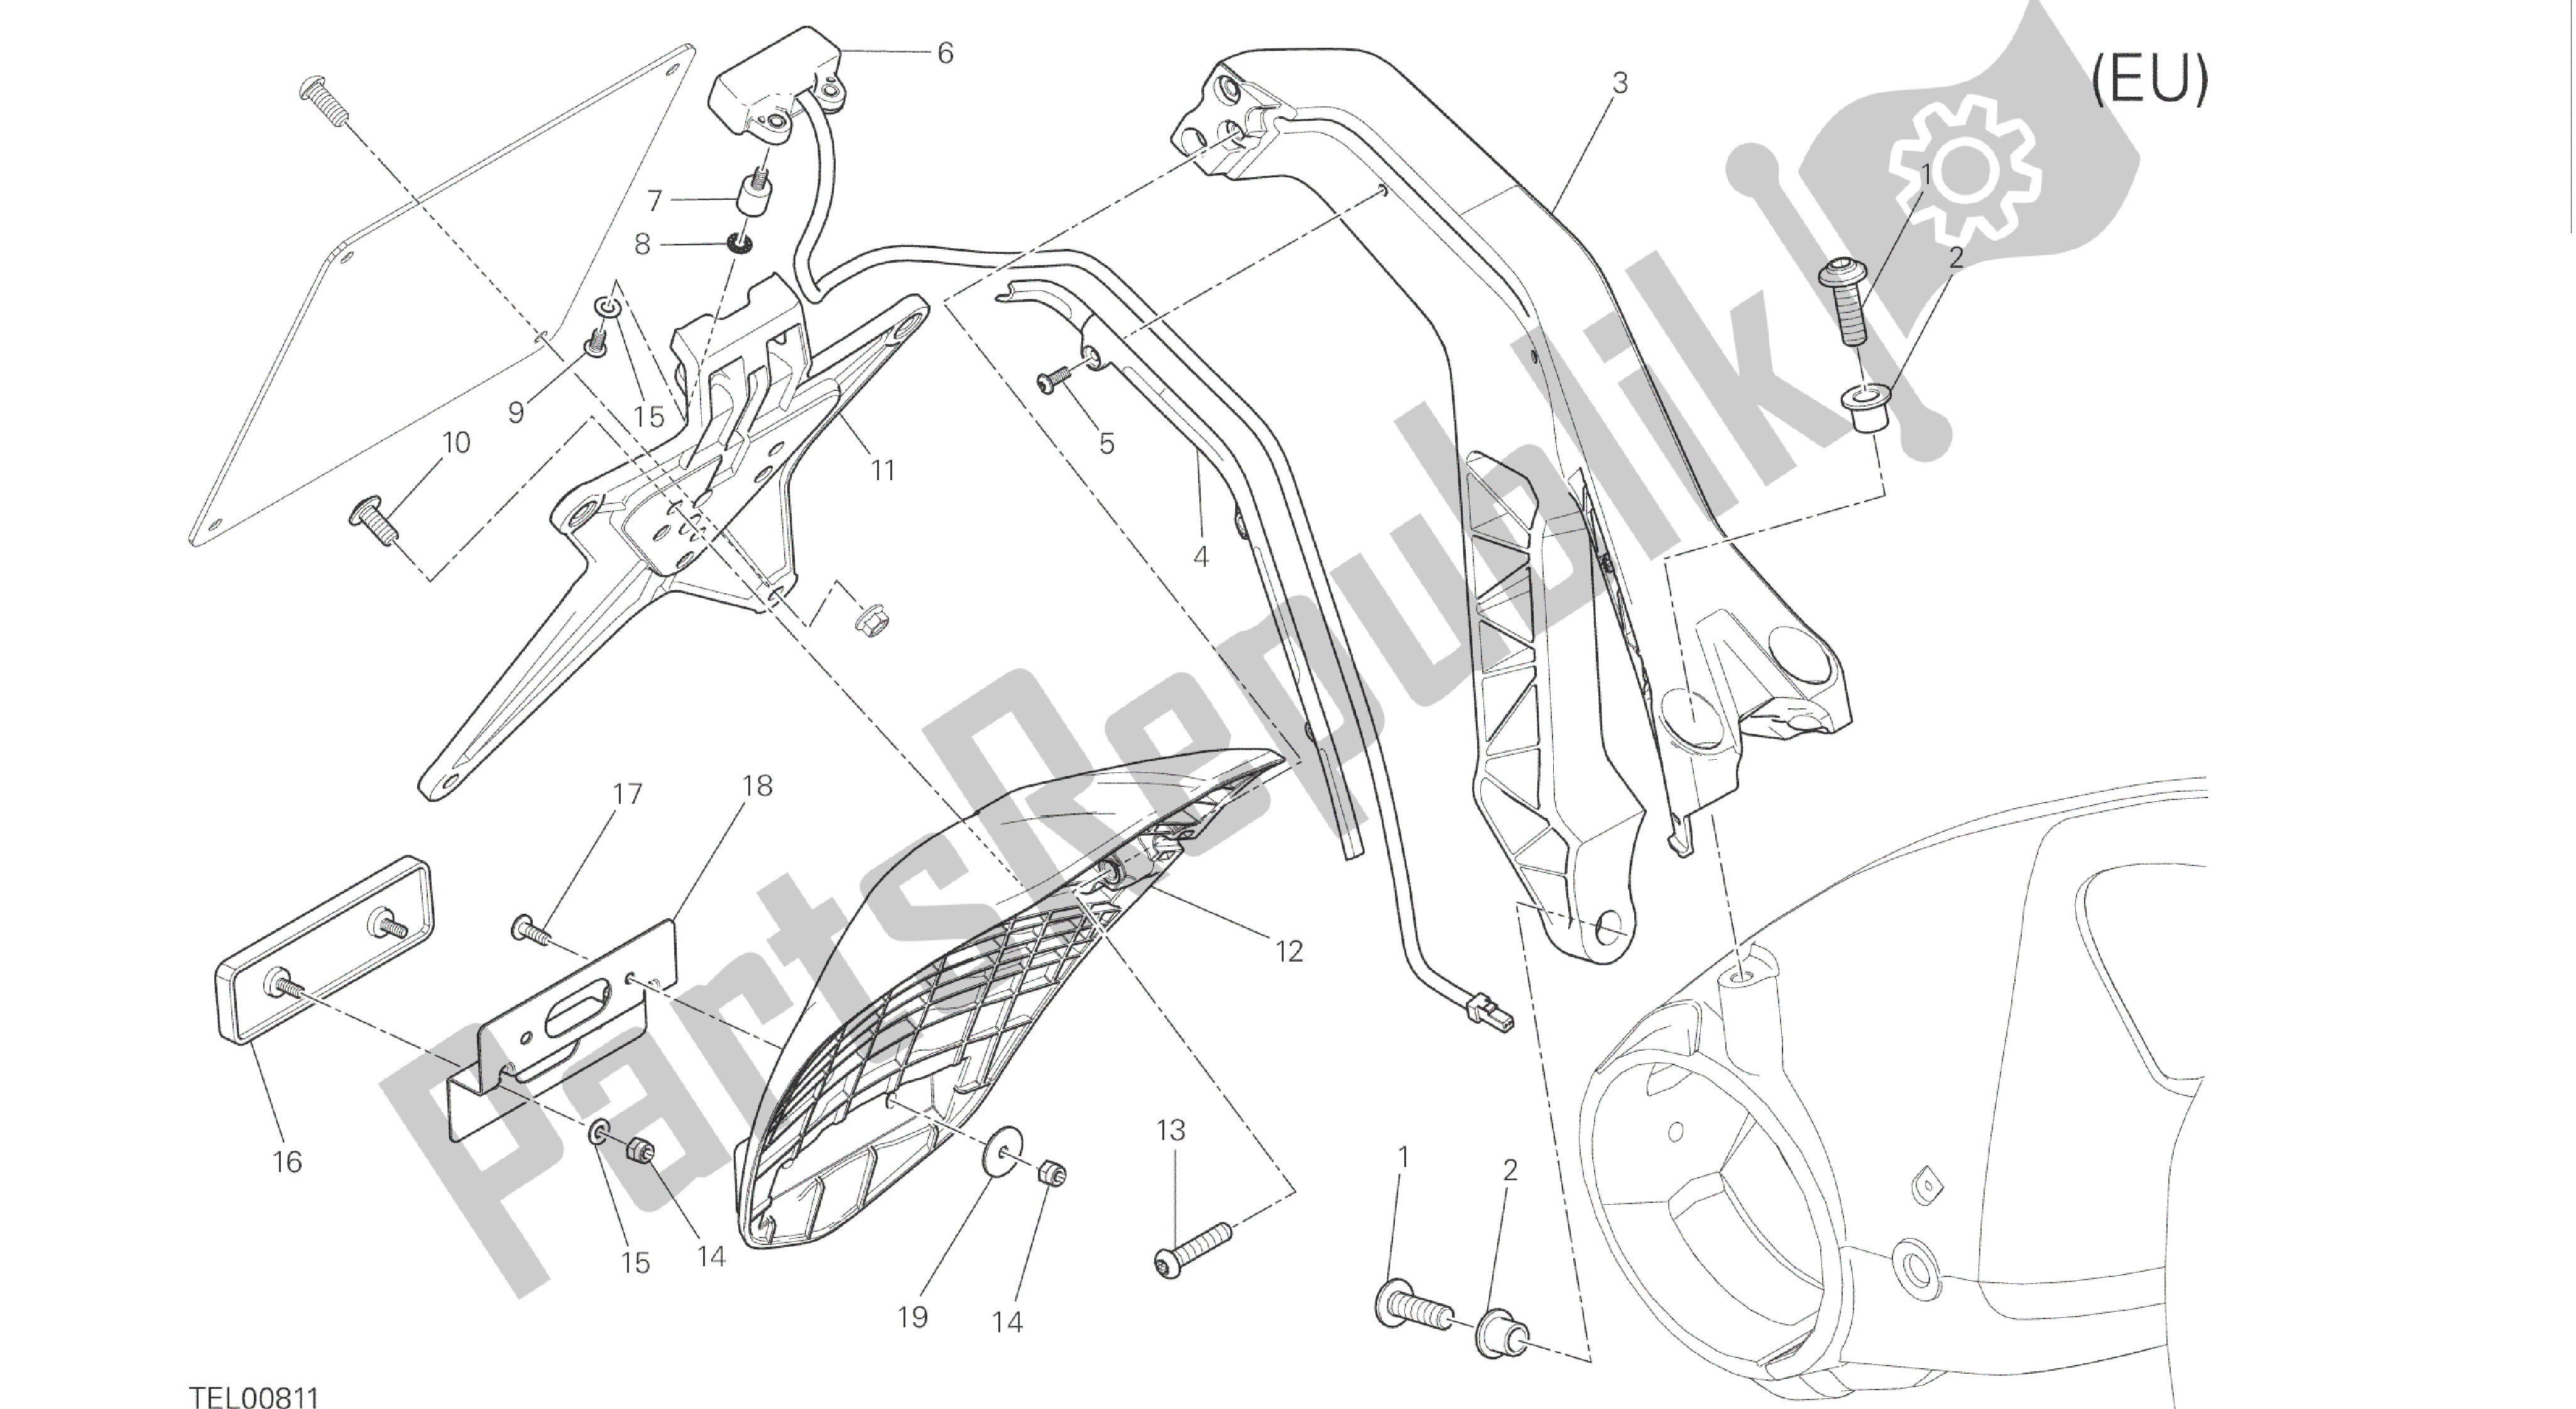 All parts for the Drawing 28b - Plate Holder [mod:m 1200;xst:eur,fra,jap,twn]group Electric of the Ducati Monster 1200 2016